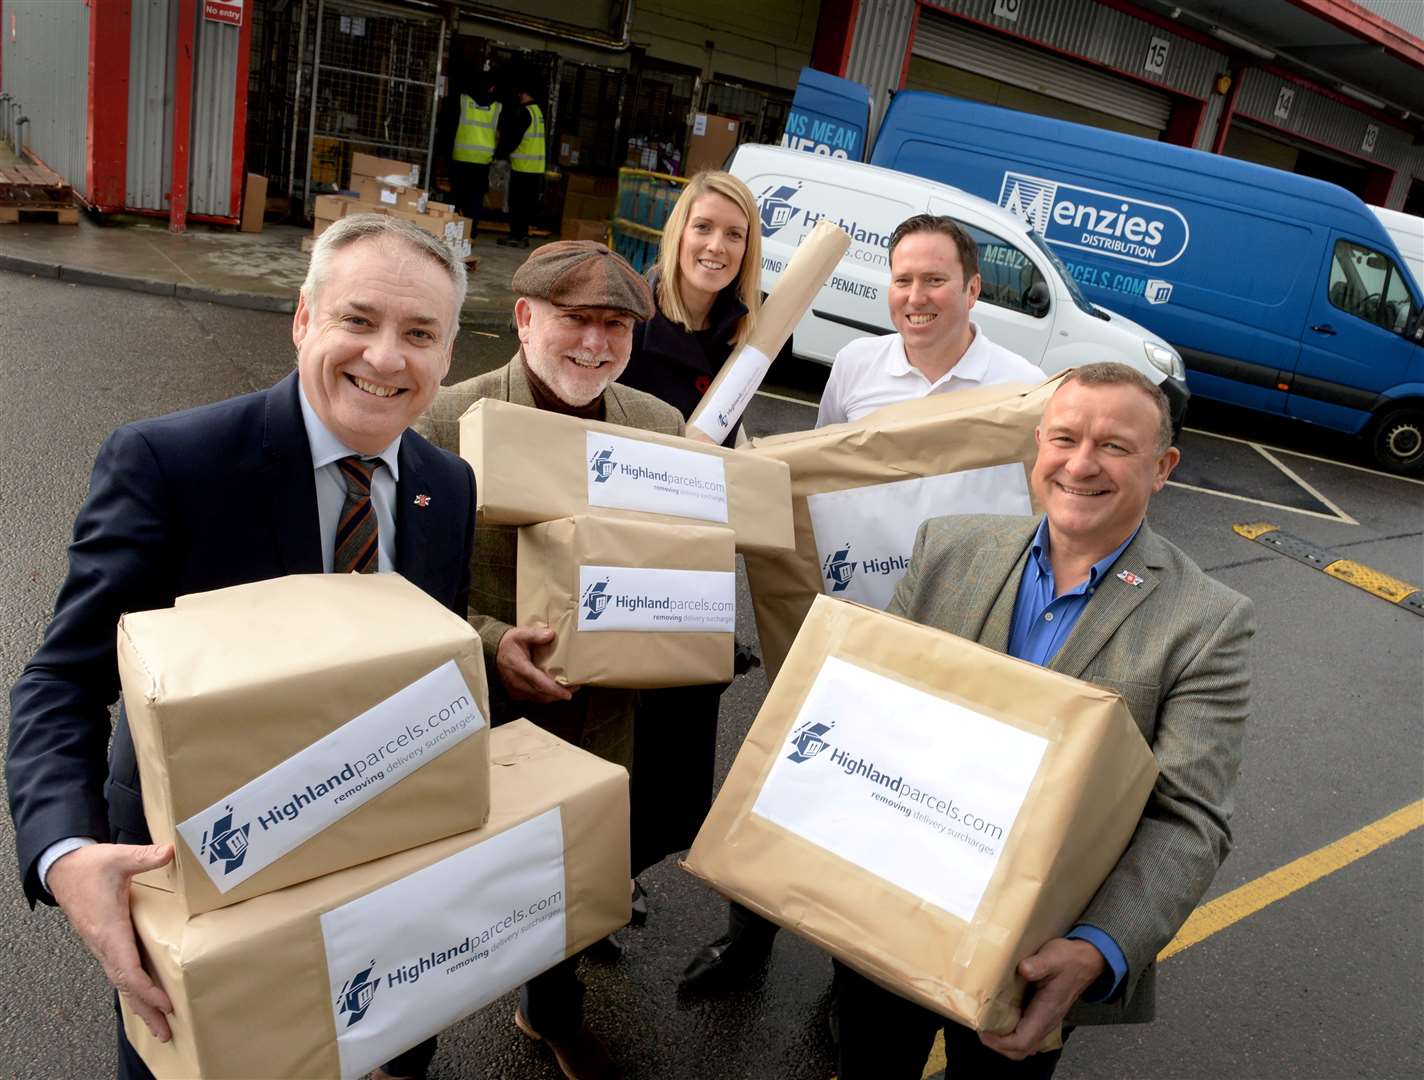 MP Drew Hendry (right) and MSP Richard Lochhead (left) have been campaigning about delivery charges to the north of Scotland for a while.